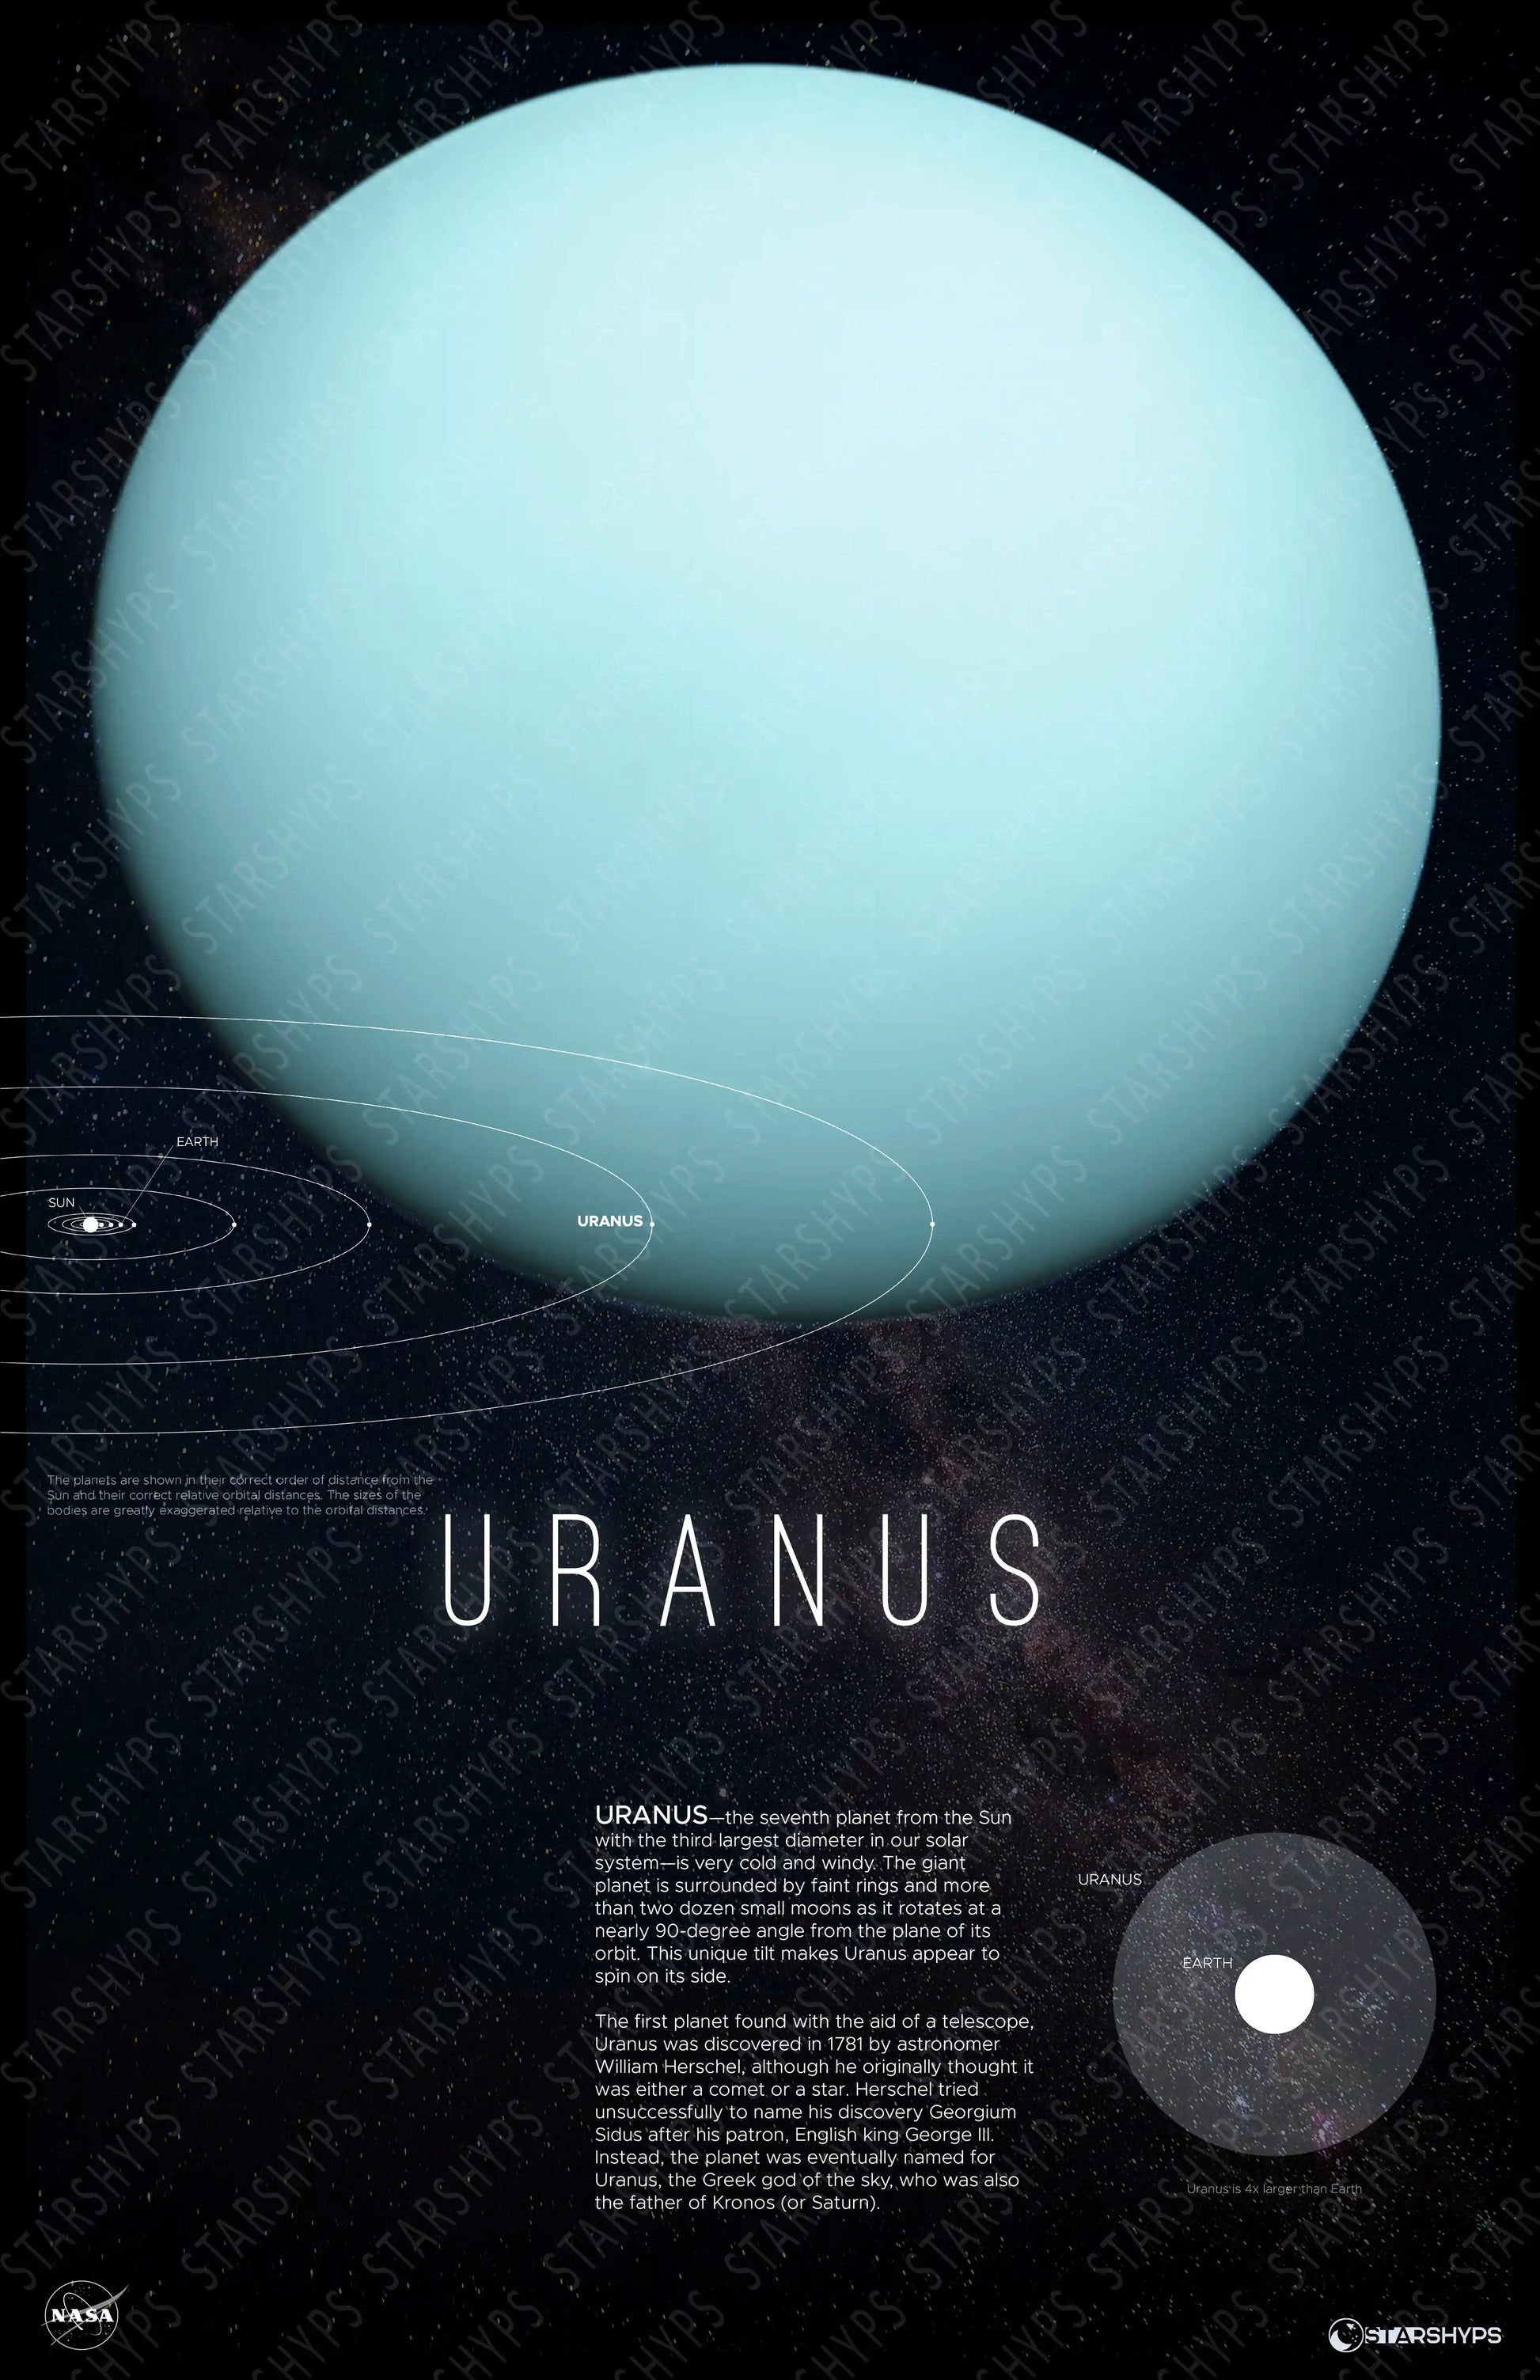 Uranus Orbit Print | Uranian Elegance Decor | Rocket Blueprint Posters | The image shows a Uranus poster, with the planet's blue-green surface in the center. Below it, the name "URANUS" and a text description are visible. The background is dark with stars, and a small diagram shows Uranus's orbit.